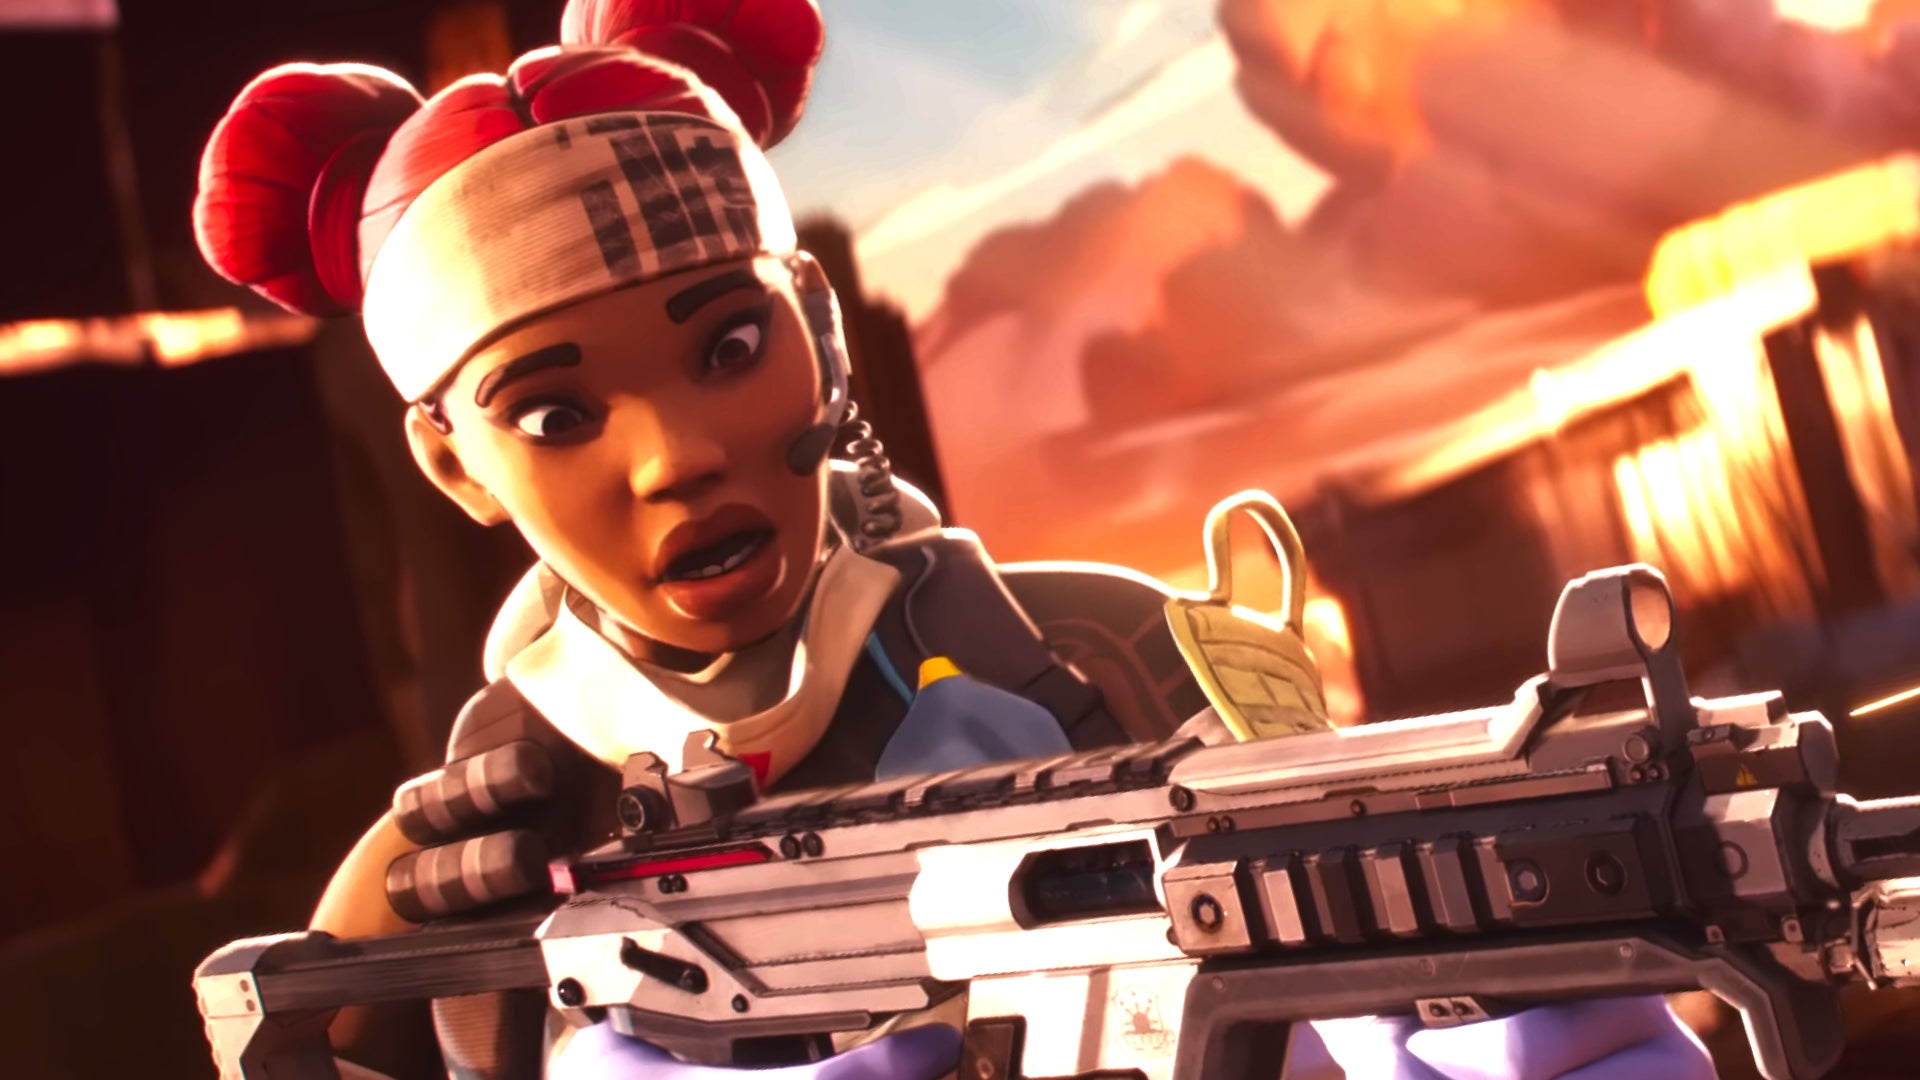 Lifeline is surprised to find her Assault Rifle has run out of bullets in Apex Legends.